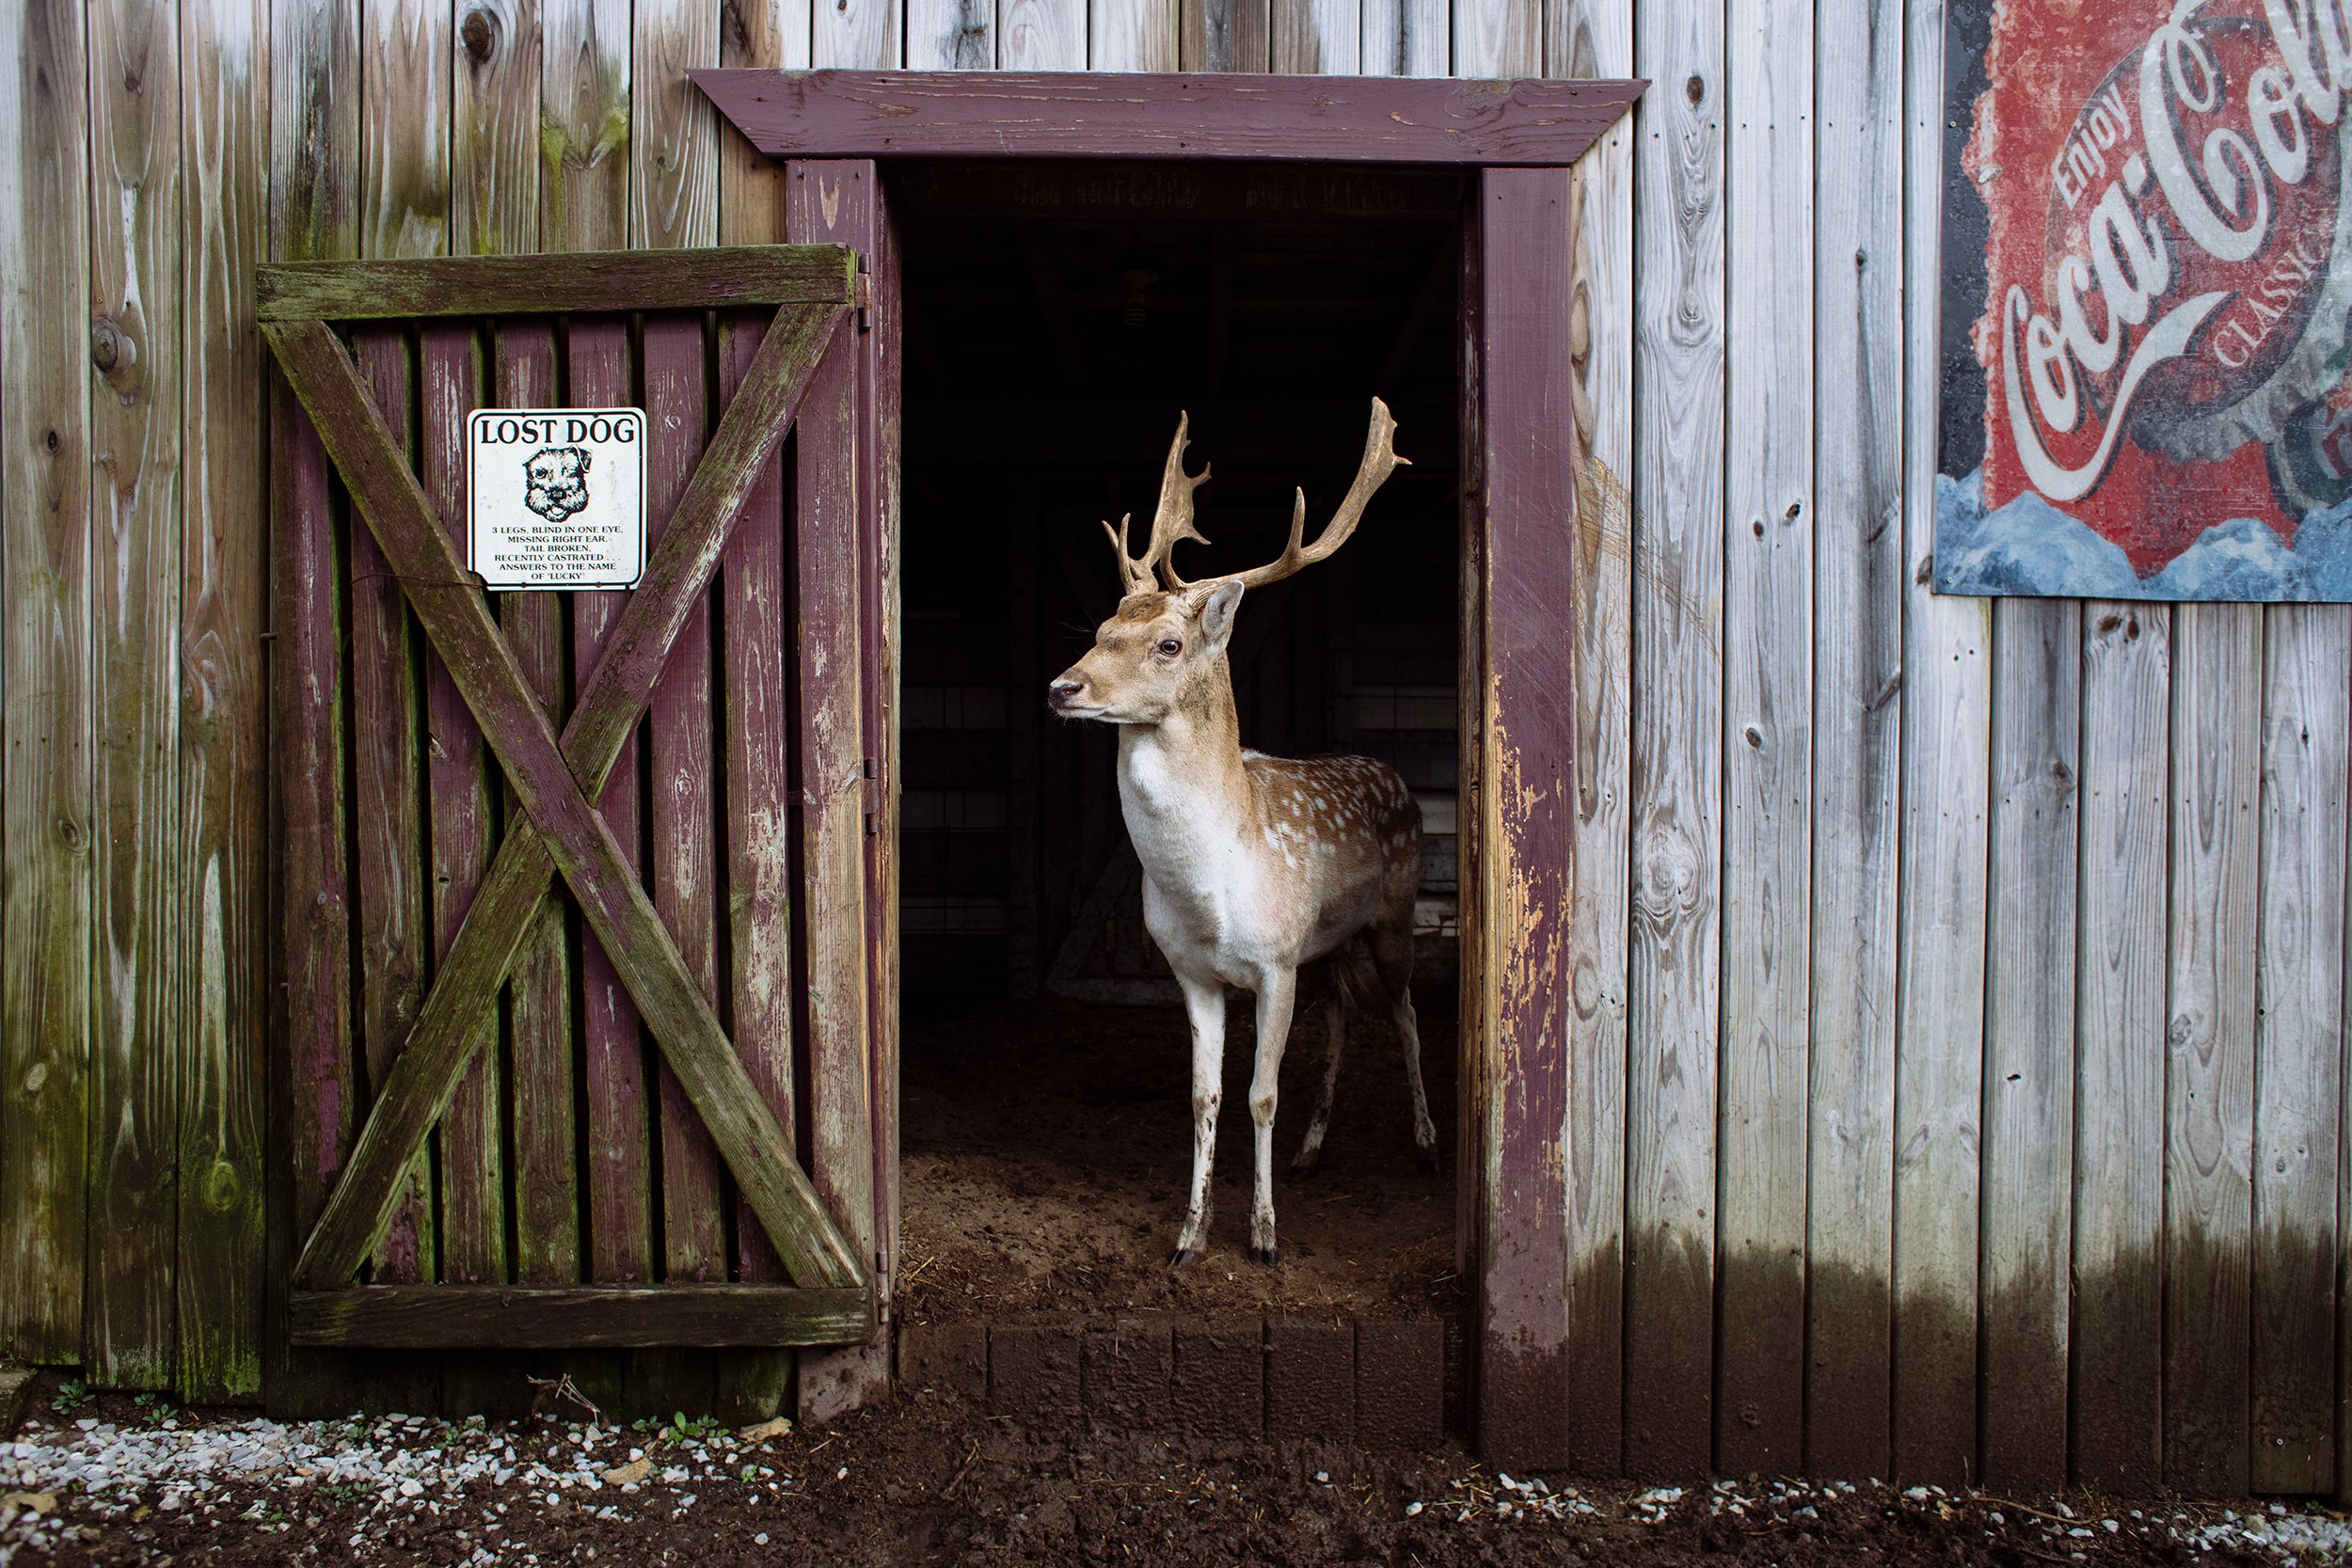  A deer peeks out of a shed at Donald Dutiel’s Wagon Wheel Ranch,  his home property and local tourist attraction riddled with antiques, random paraphernalia and a makeshift zoo in New Lexington, Ohio on Oct. 30, 2020. 